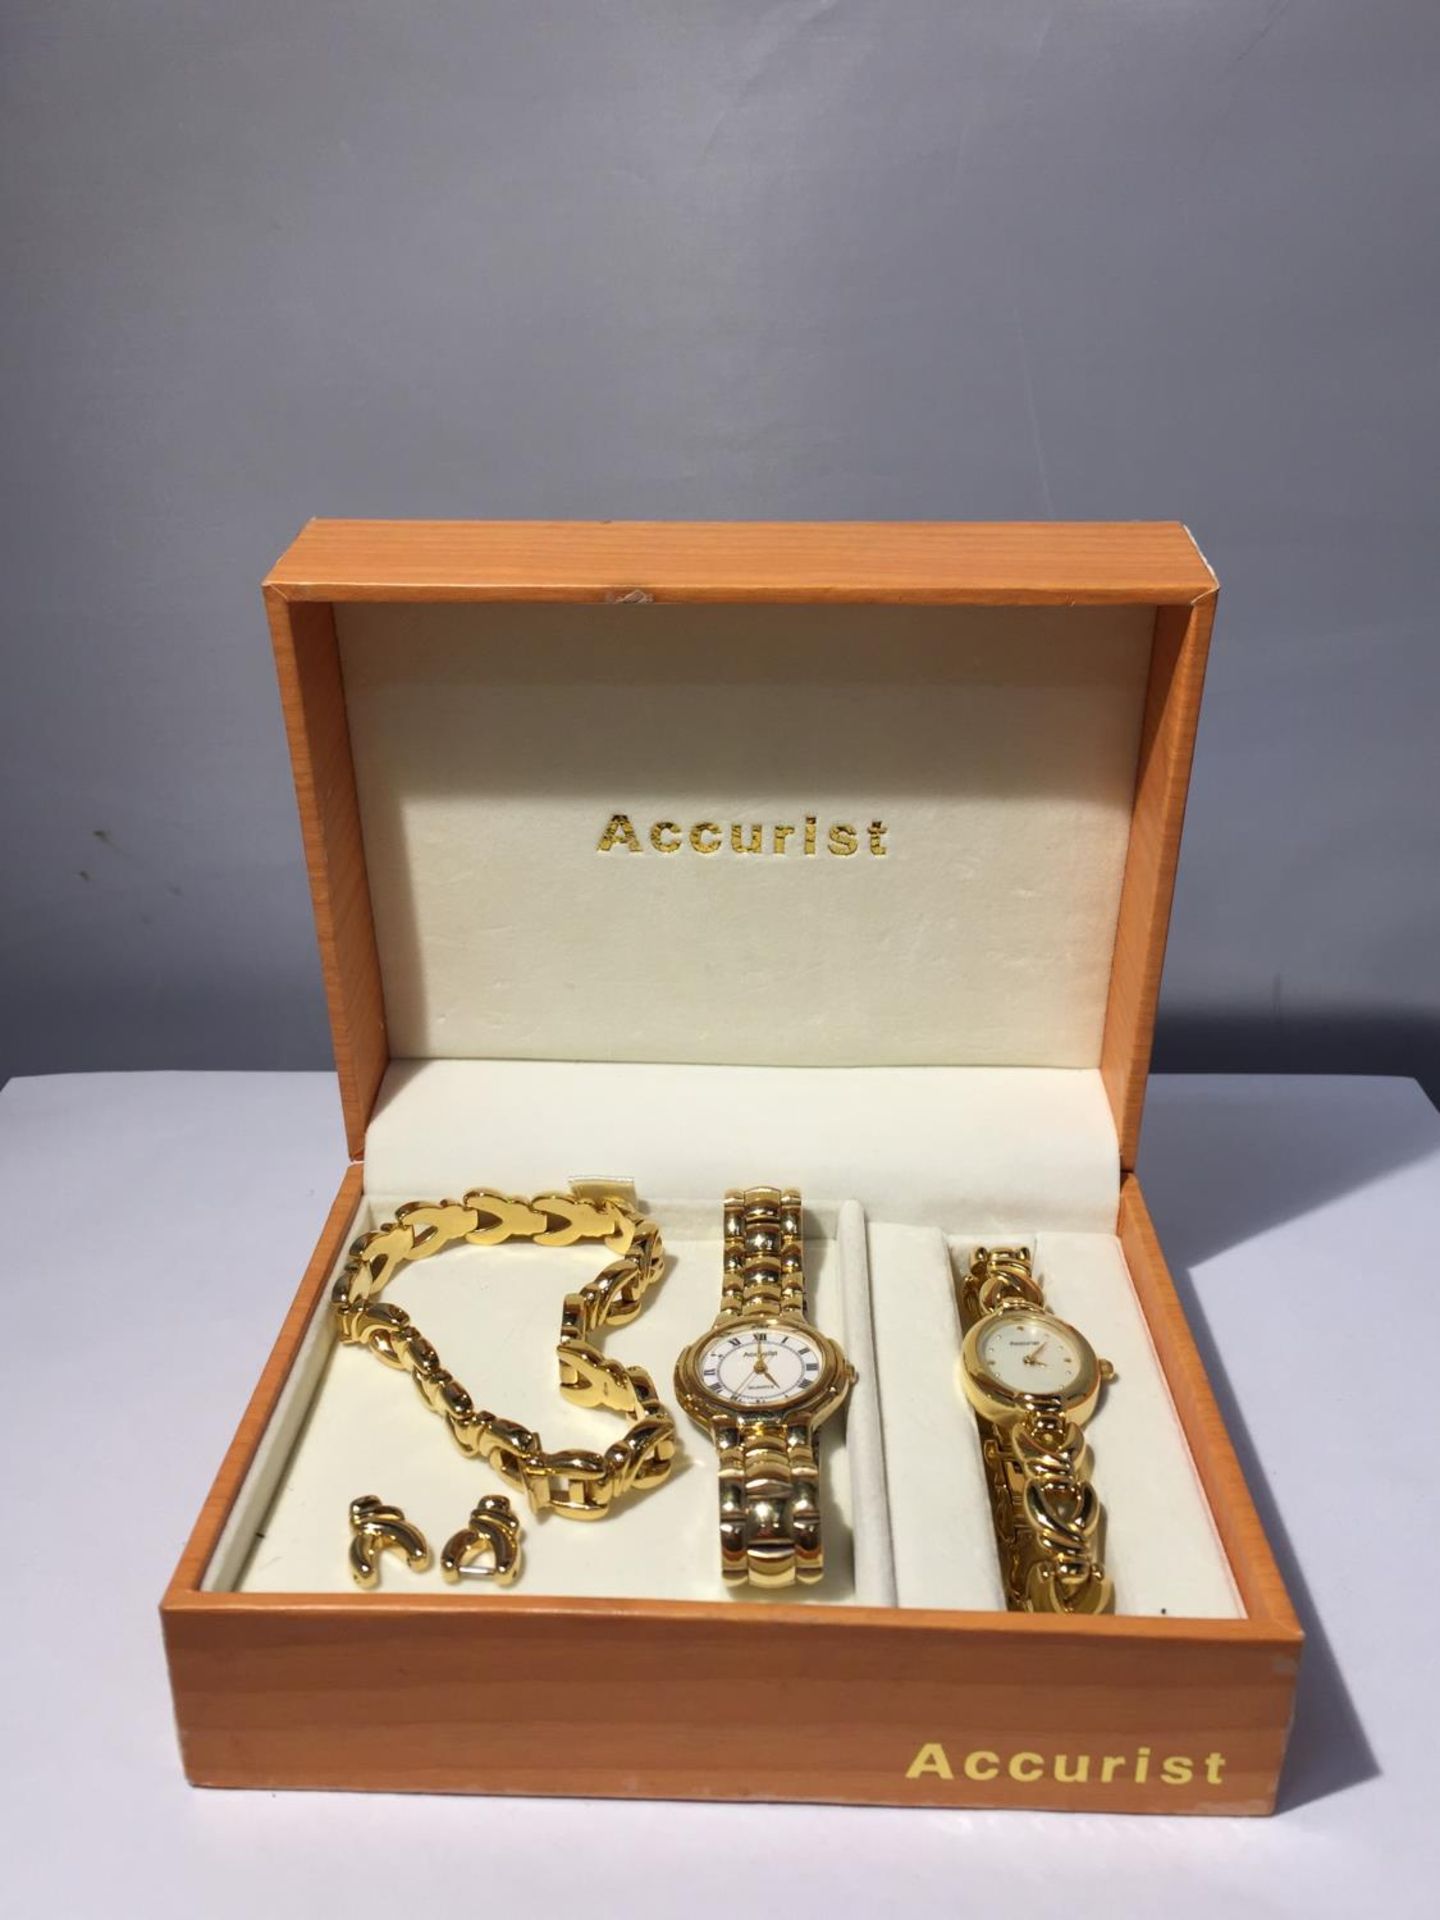 TWO LADIES ACCURIST WRISTWATCHES AND A BRACELET IN A WOODEN PRESENTATION BOX